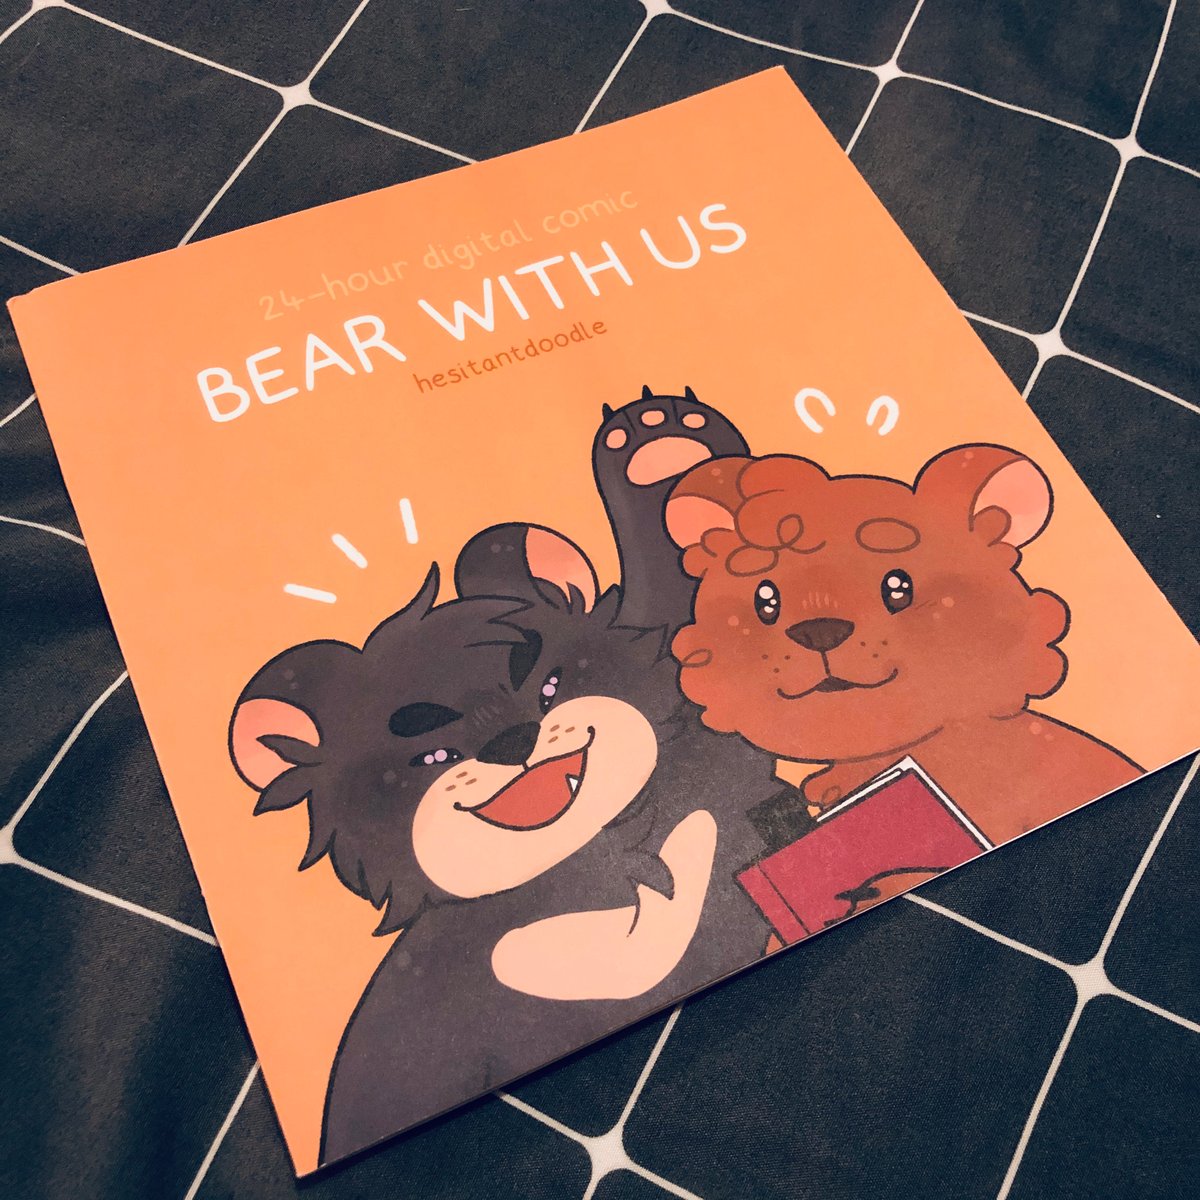 Bear With Us